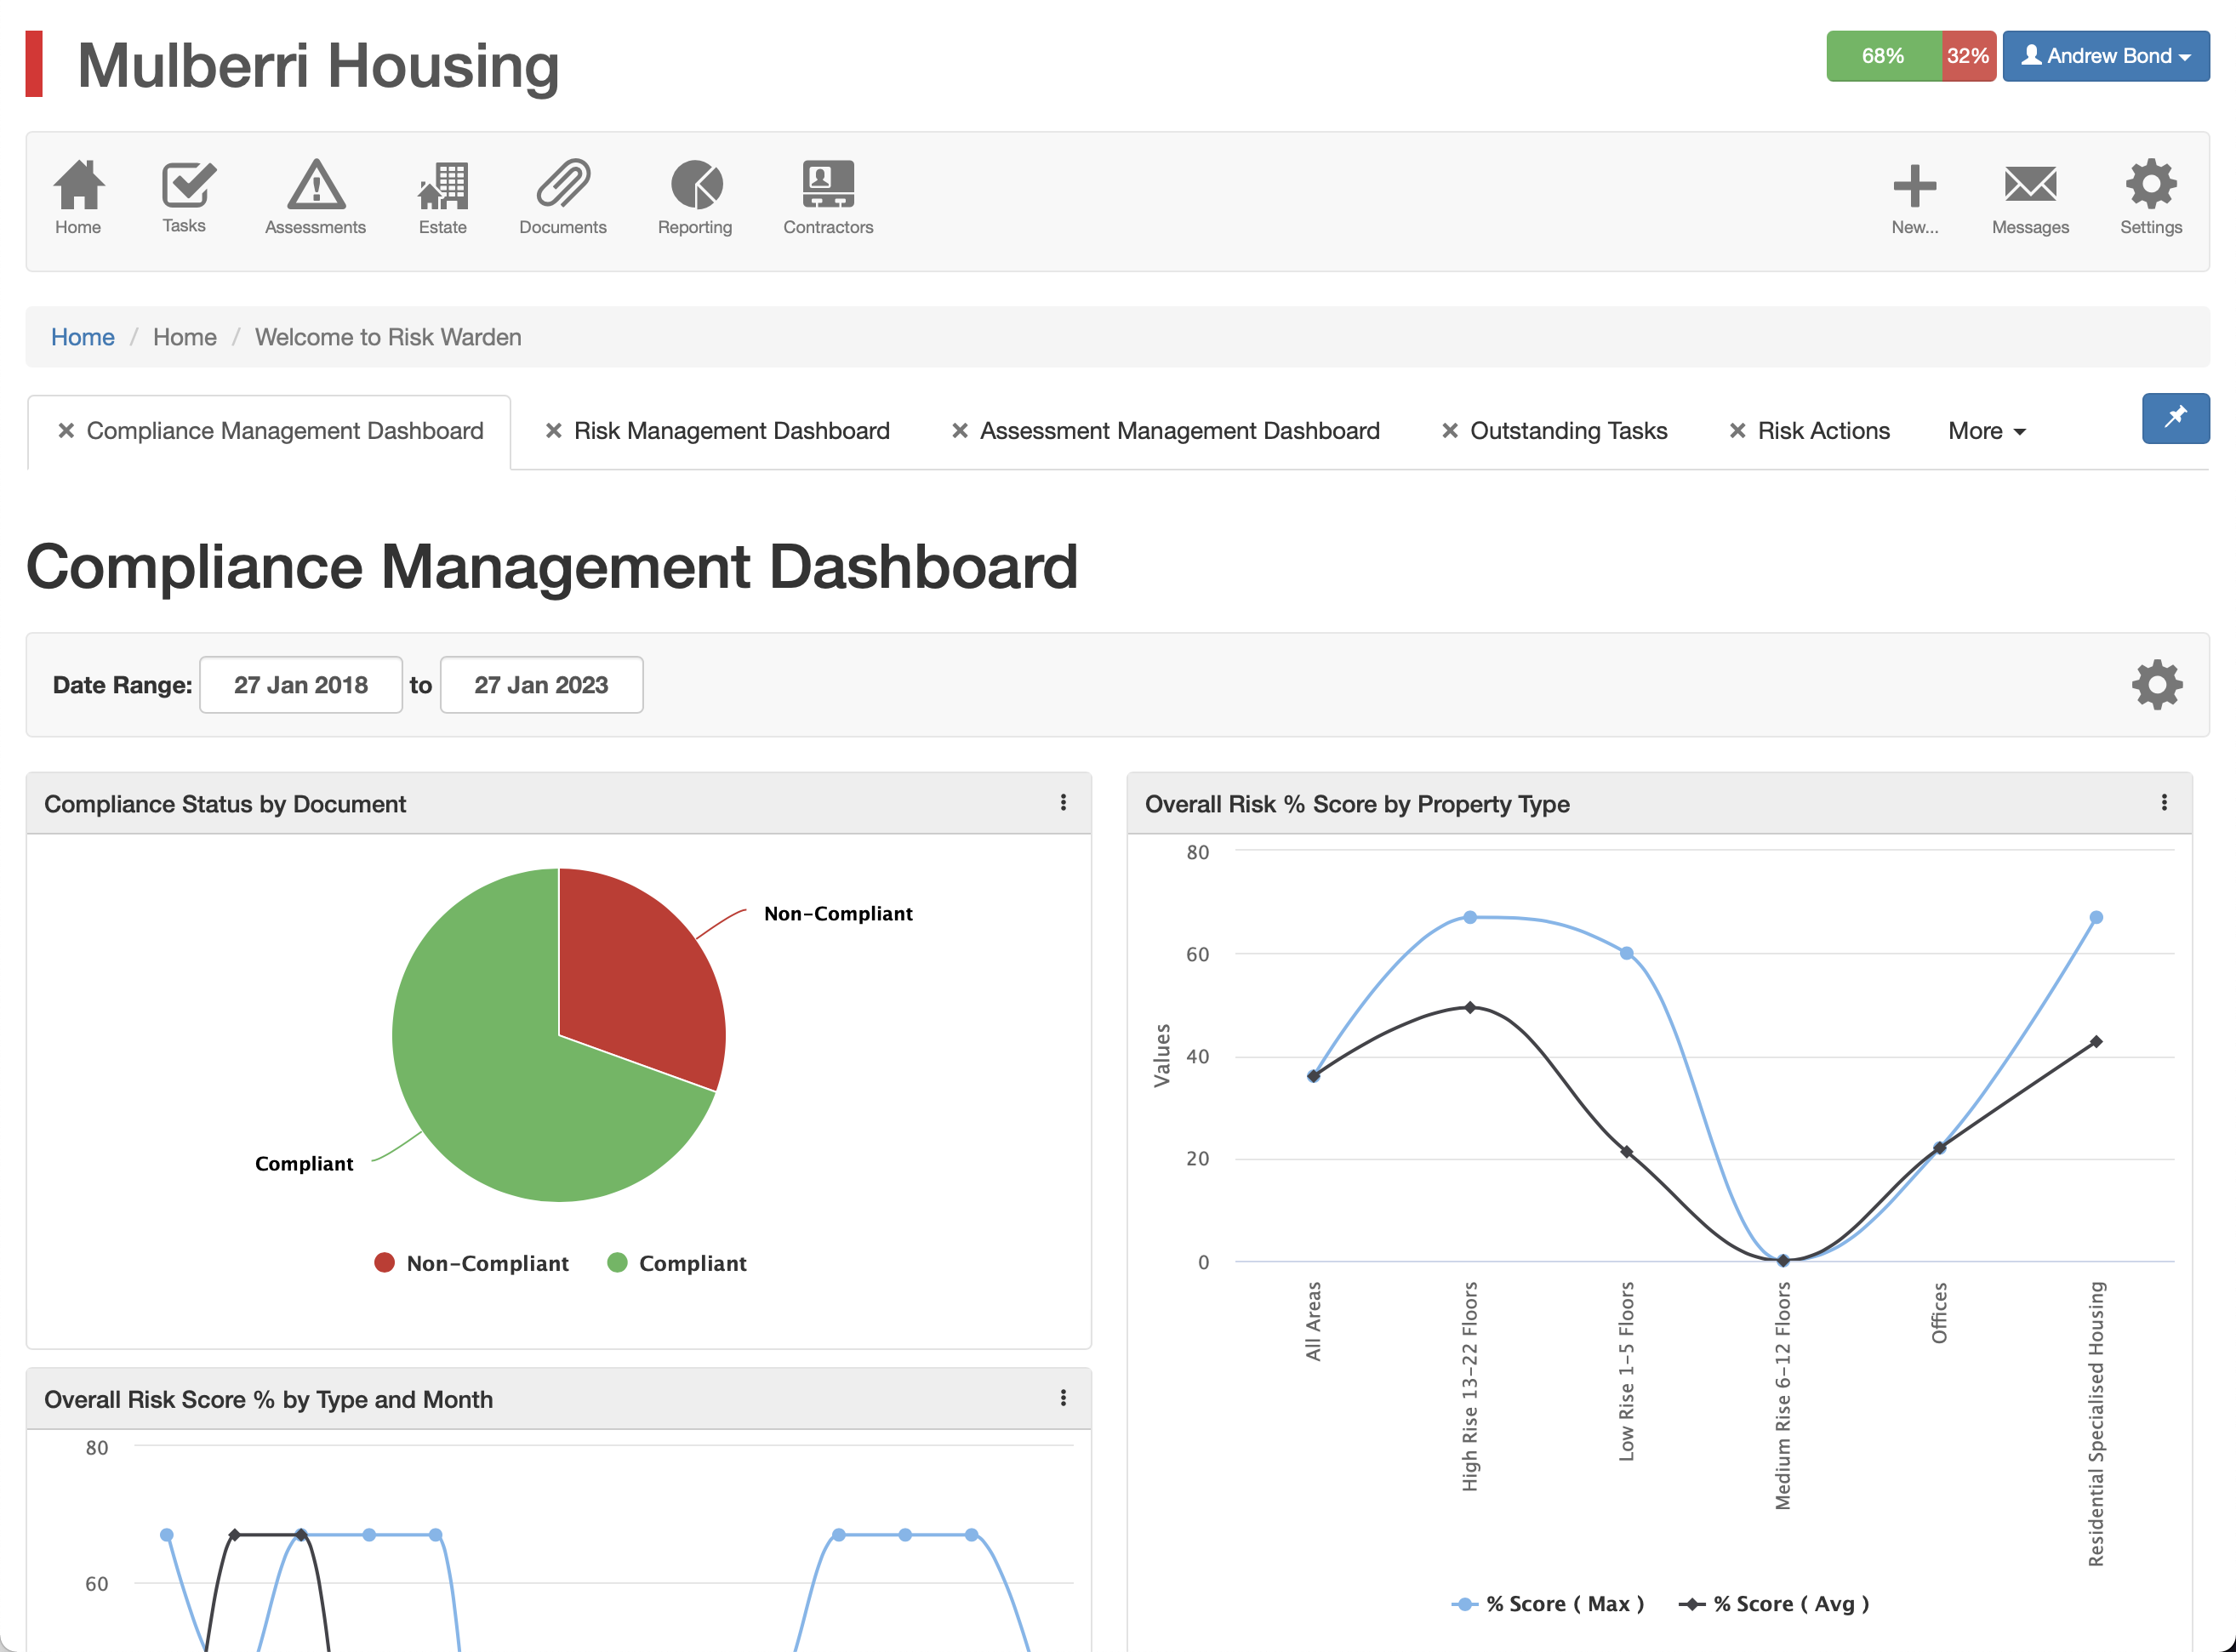 Customisable views, reports and dashboards